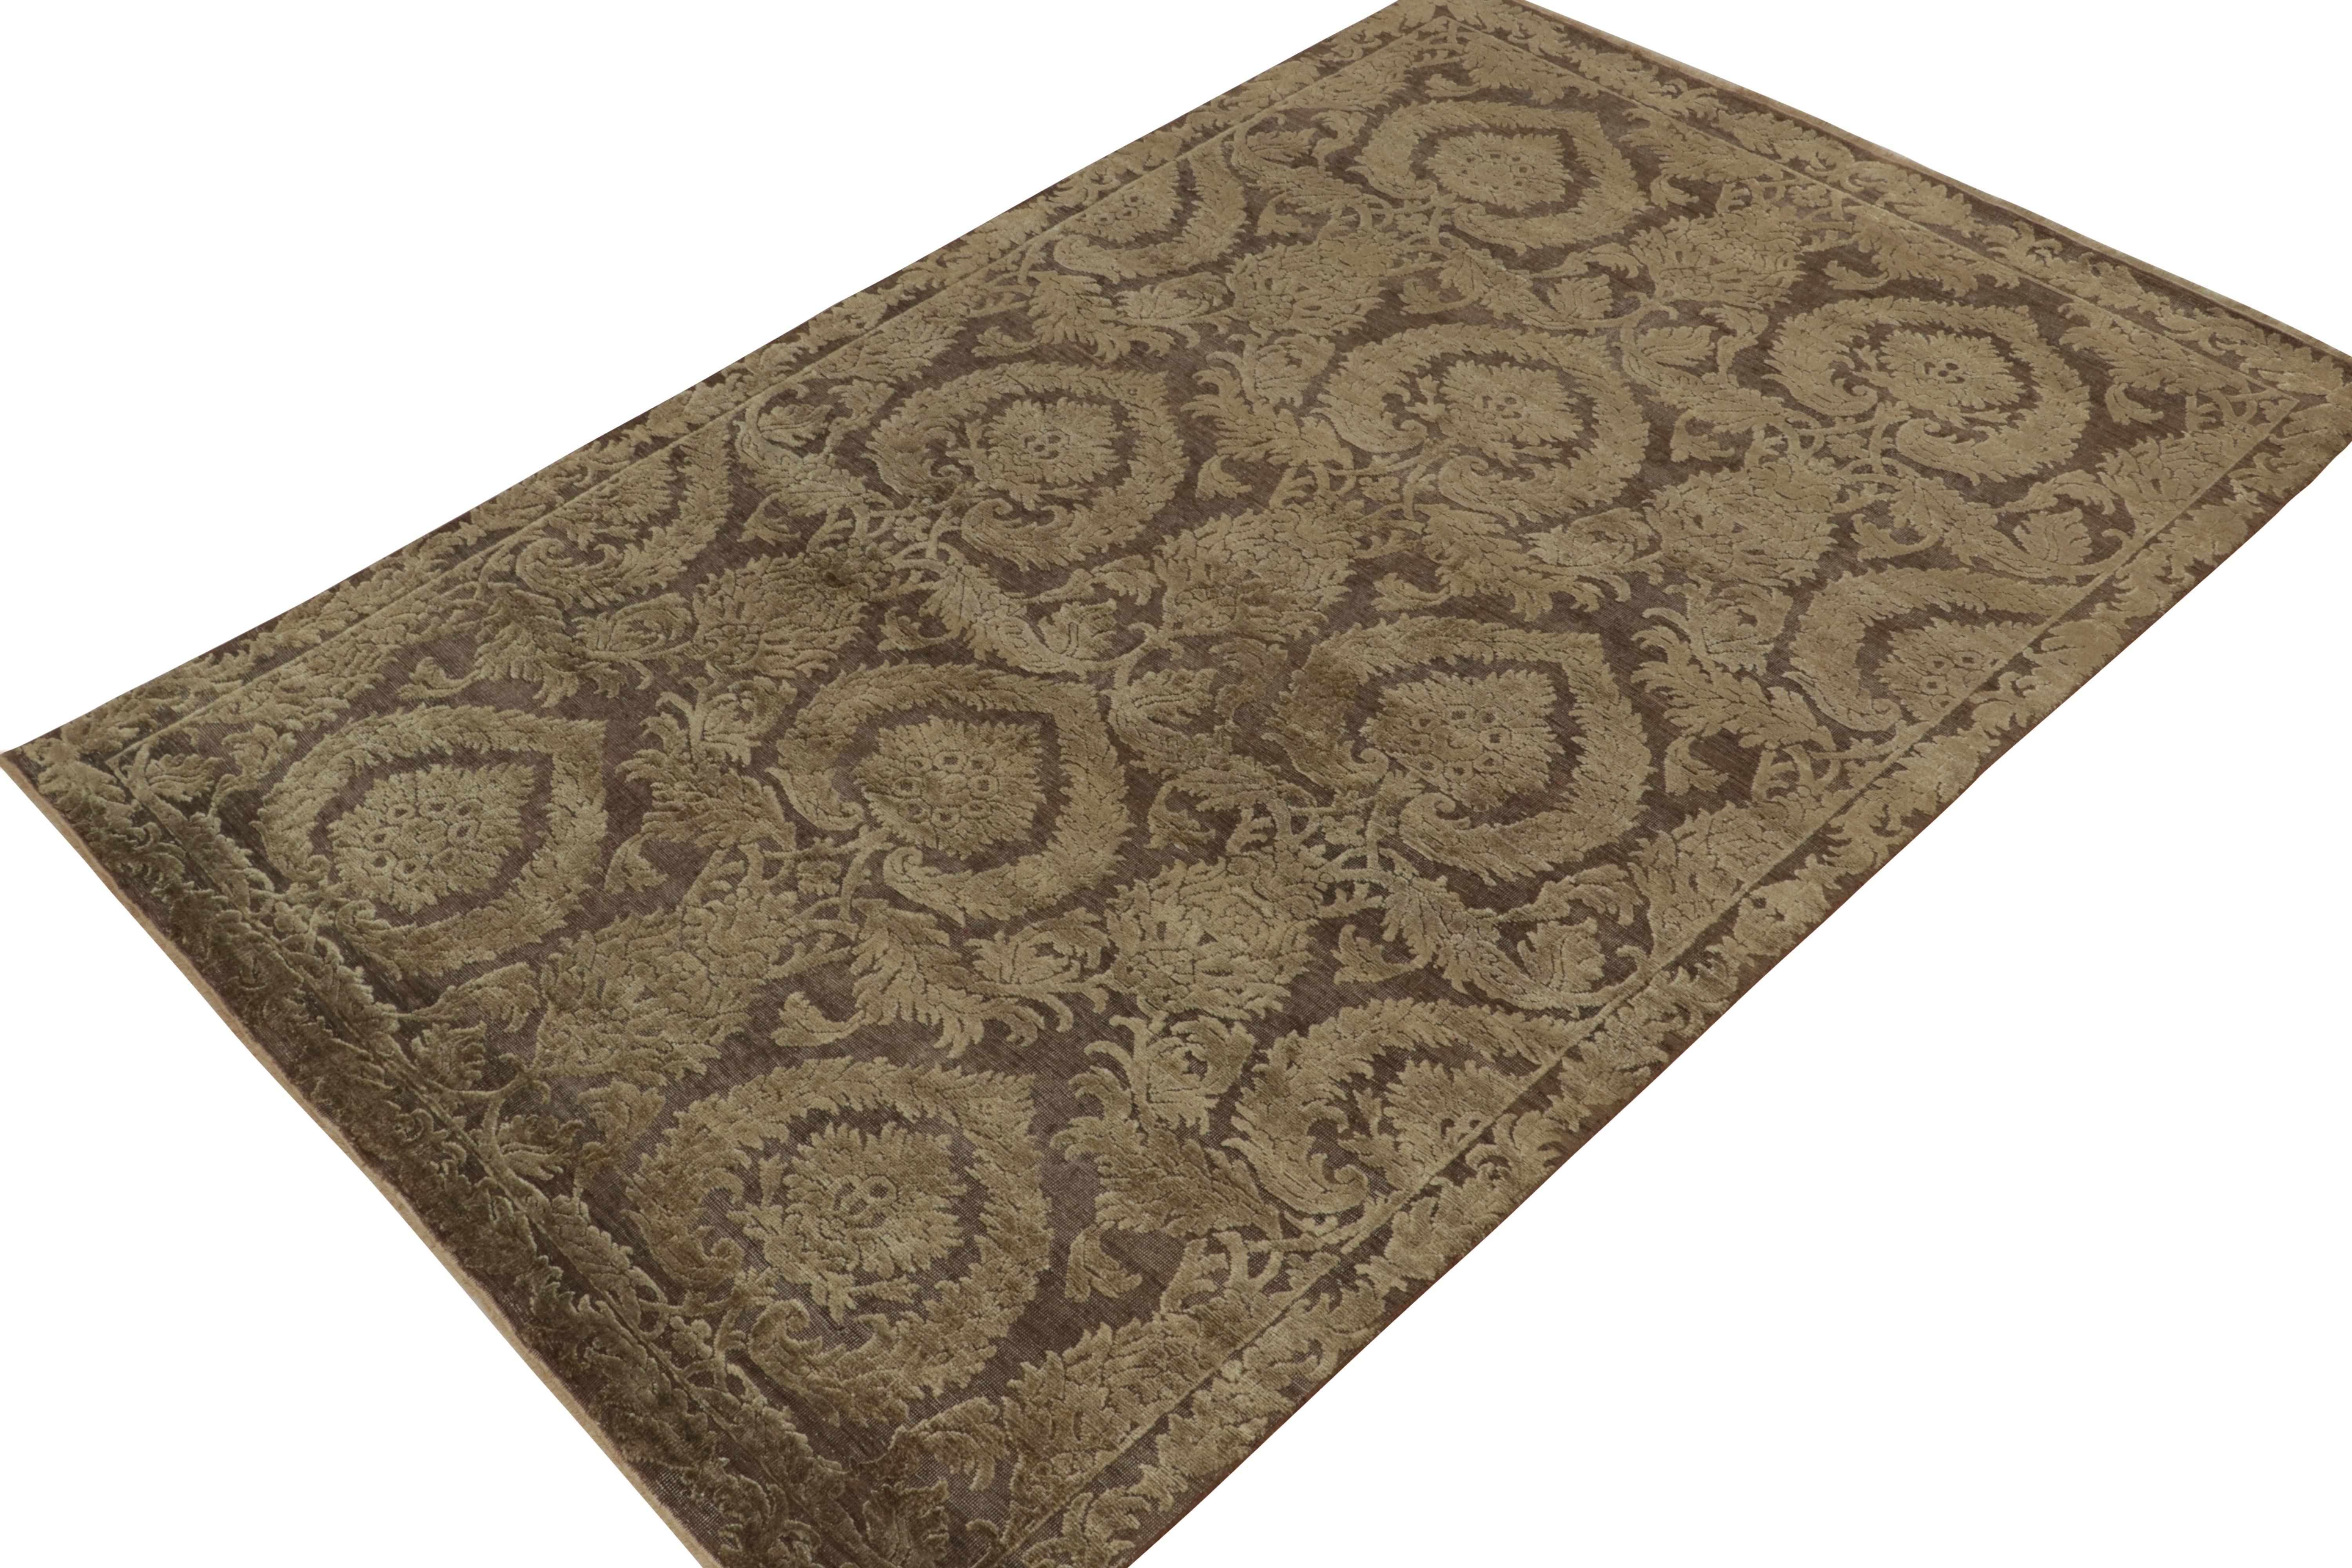 Handknotted in a luxurious blend of wool & silk, this 6x9 contemporary rug from our Modern Classics collection is particularly inspired by classic Italian art styles.

On the Design: An all over floral pattern in luscious beige-brown tones enjoys